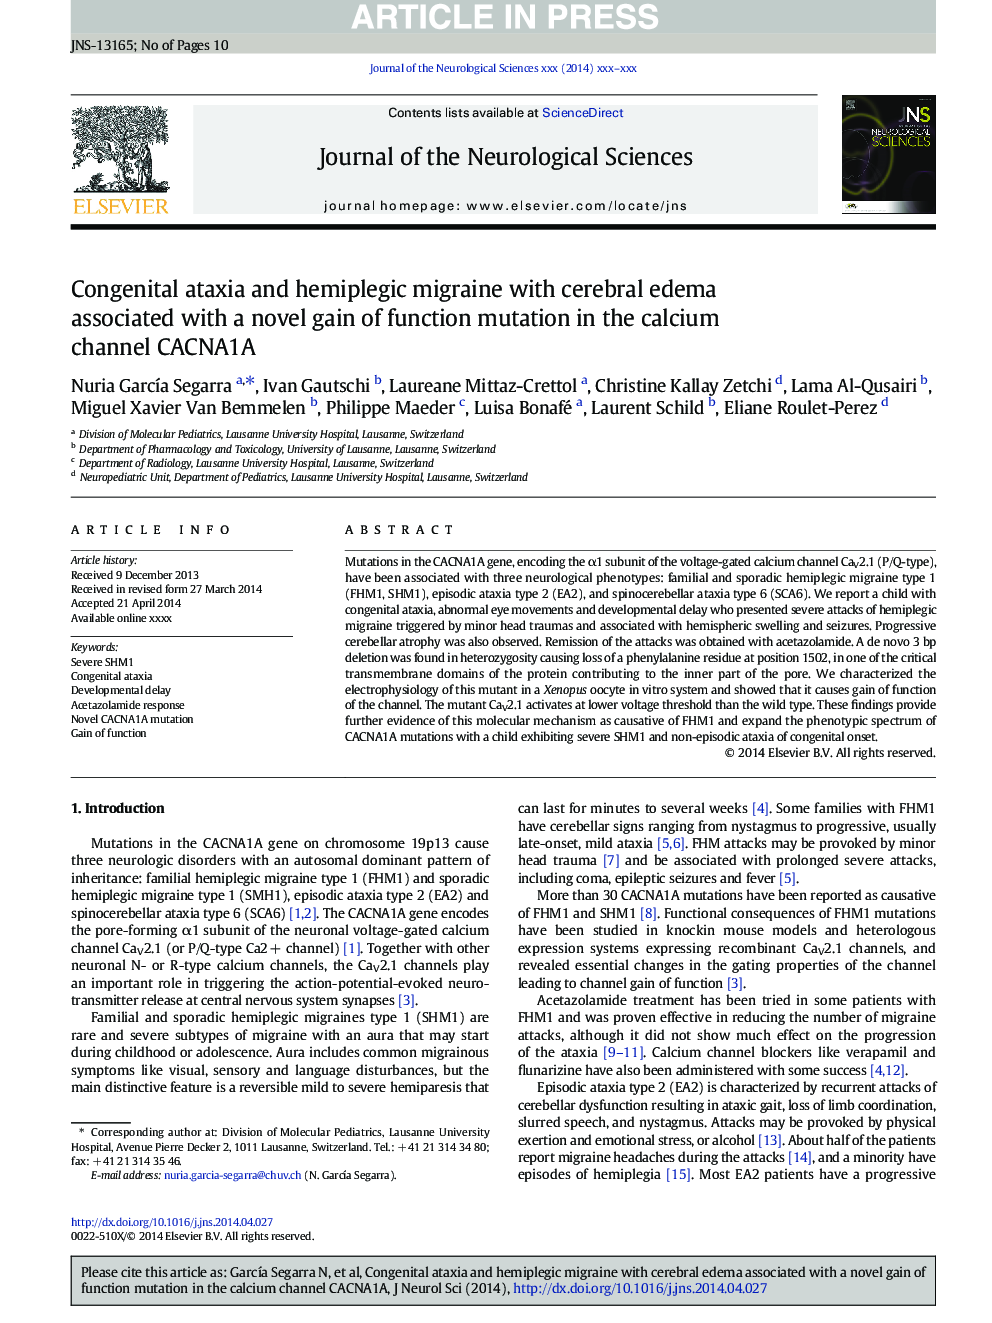 Congenital ataxia and hemiplegic migraine with cerebral edema associated with a novel gain of function mutation in the calcium channel CACNA1A